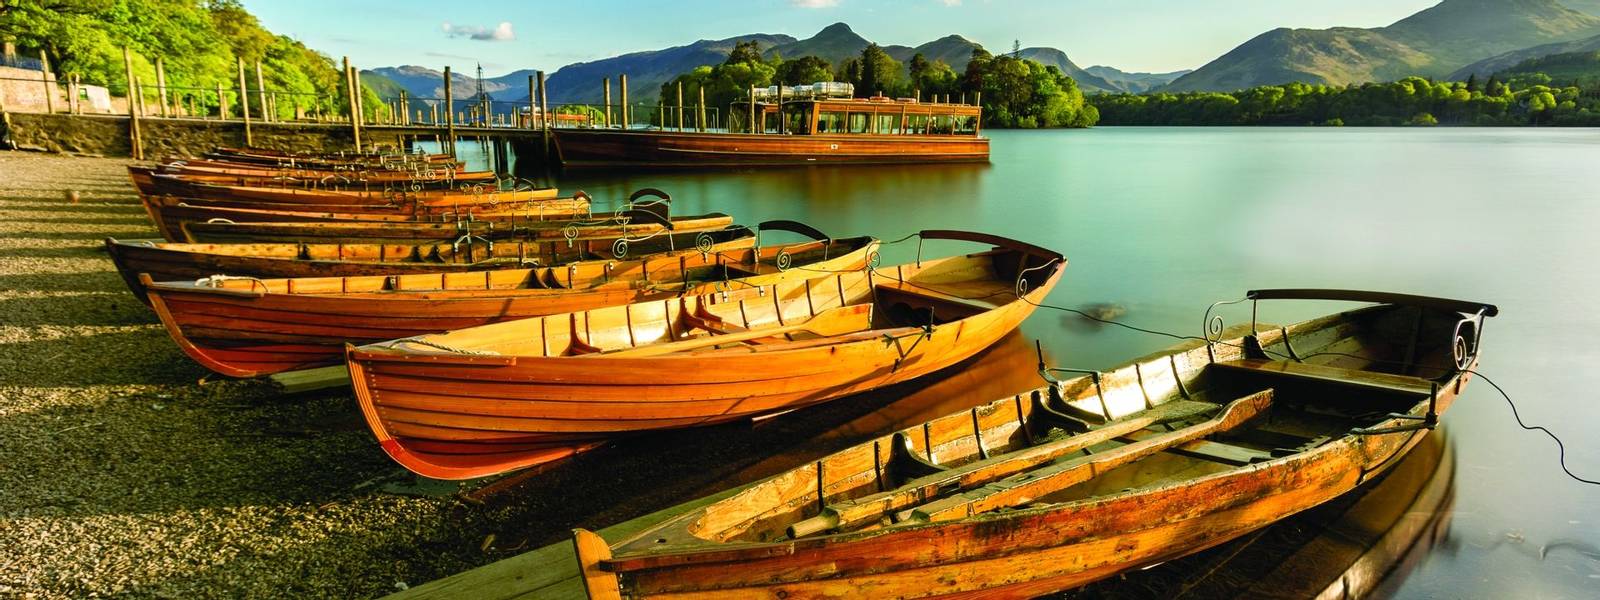 Wooden Rowing Boats lined up on shoreline being illuminated with golden light from the setting sun. Derwentwater, Lake Distr…